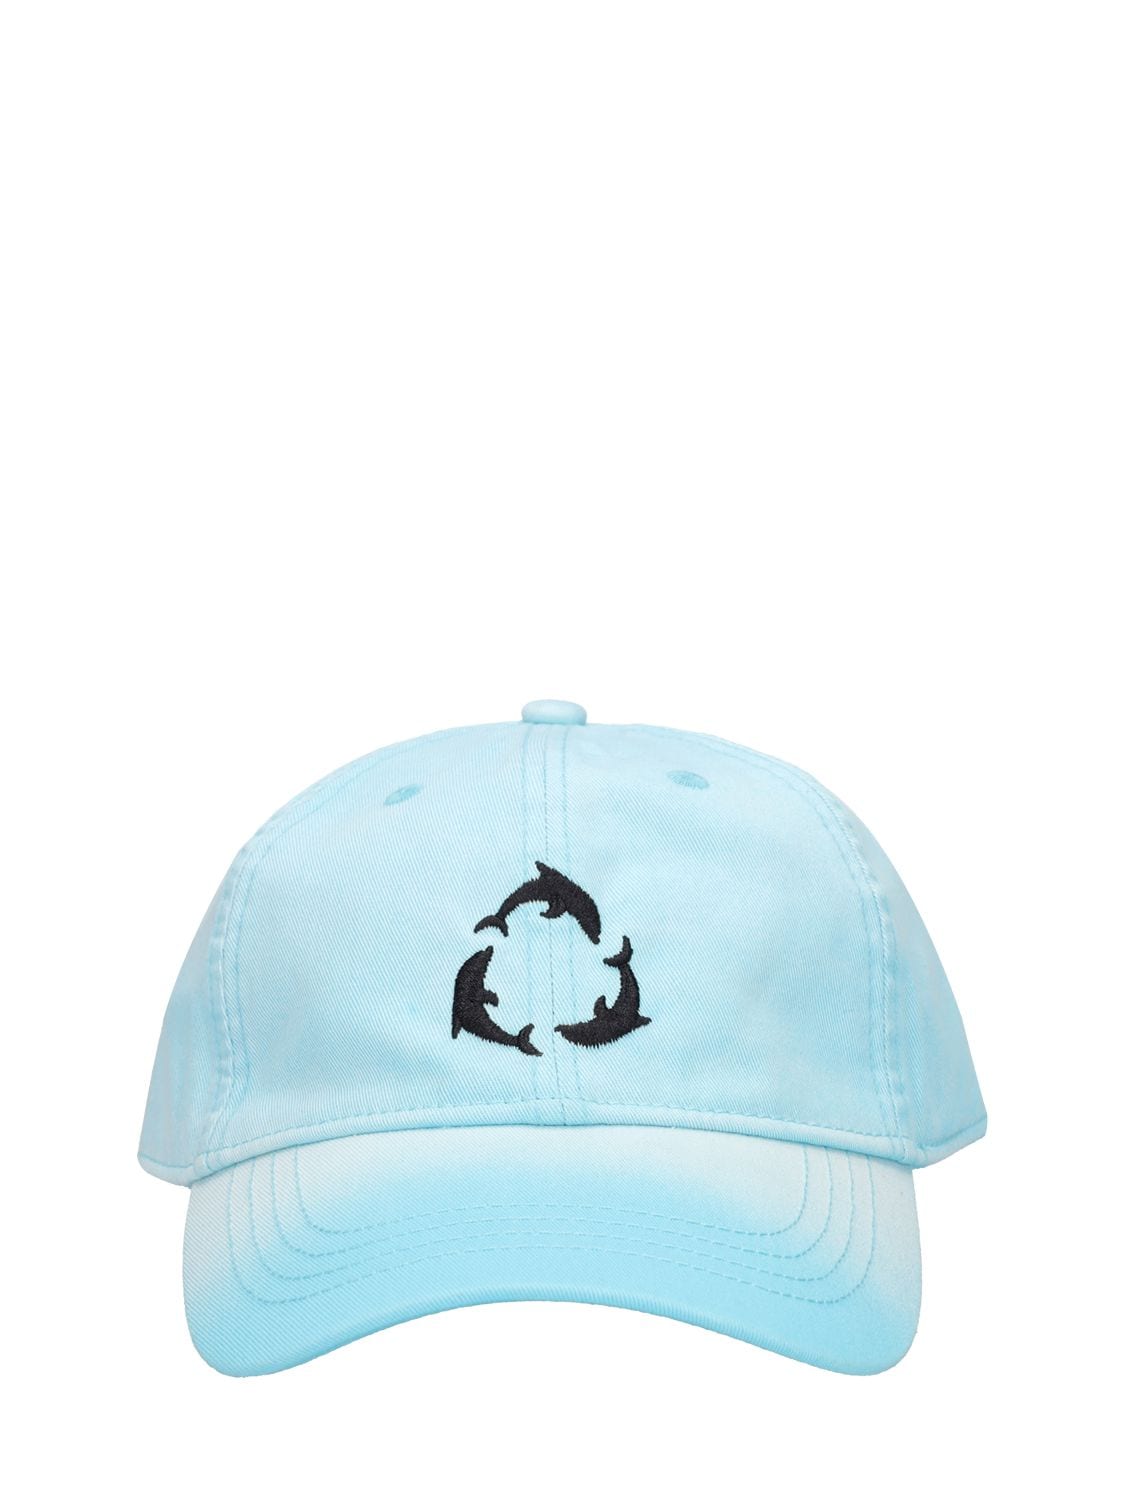 BOTTER DOLPHIN EMBROIDERED COTTON BASEBALL CAP